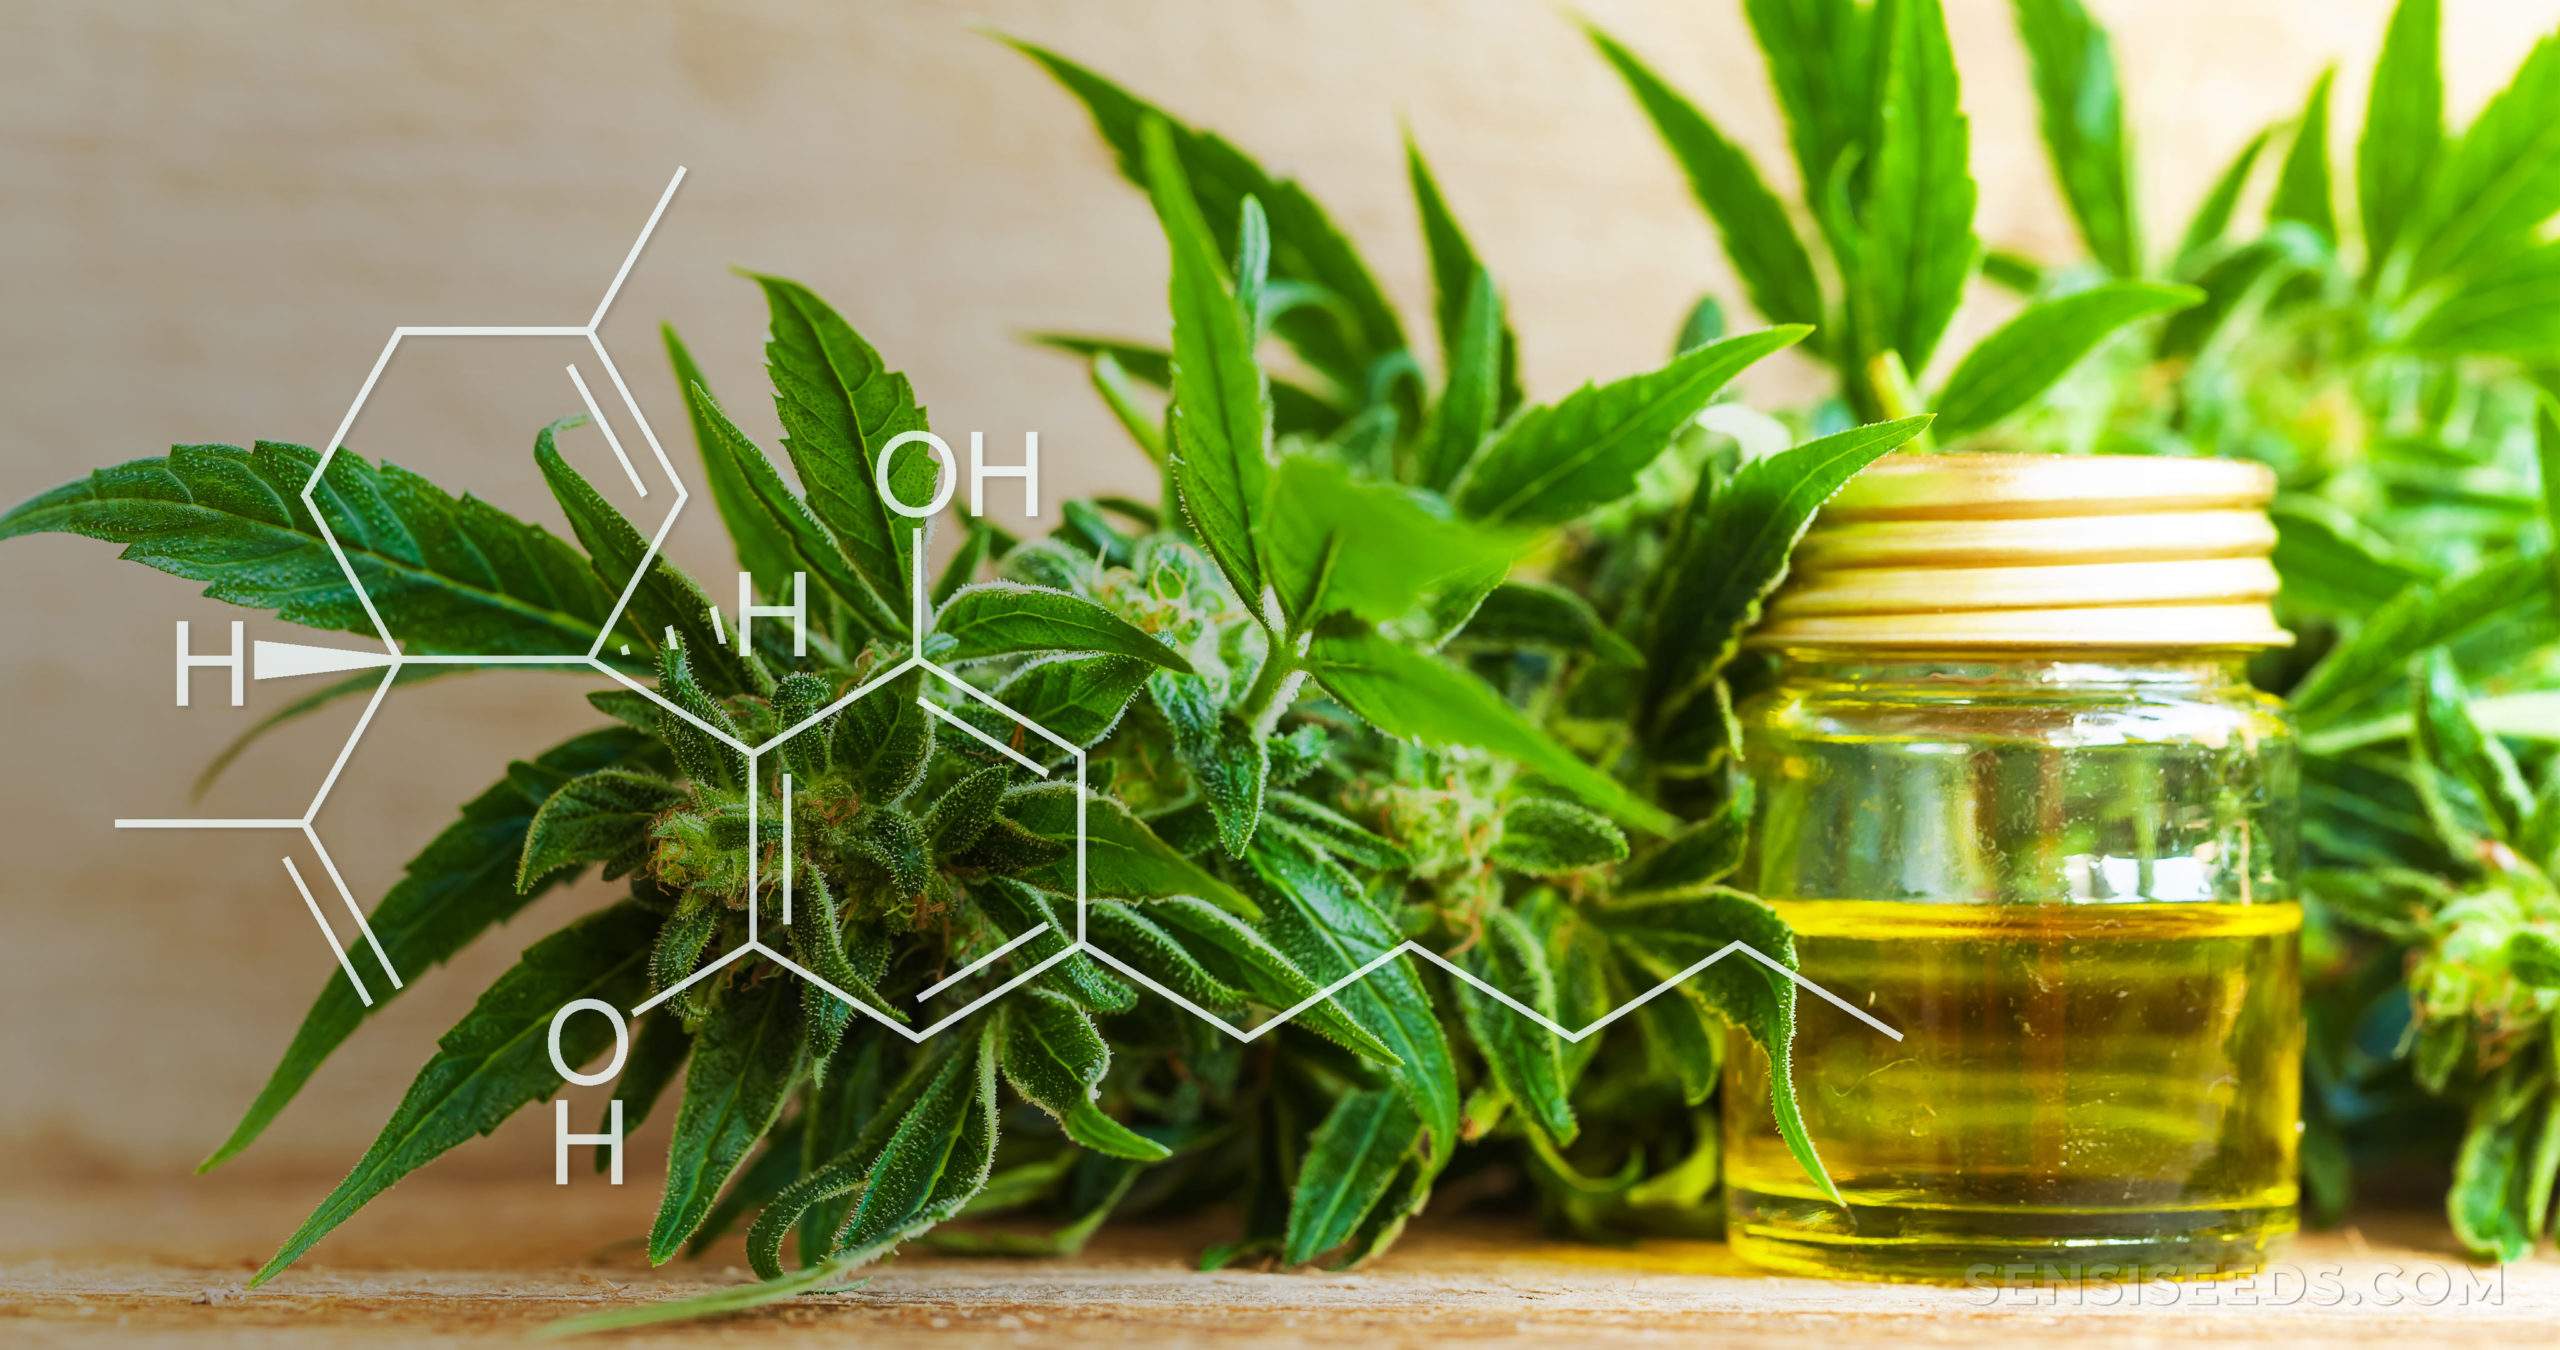 Featured image for “What is CBD and what is it used for?”